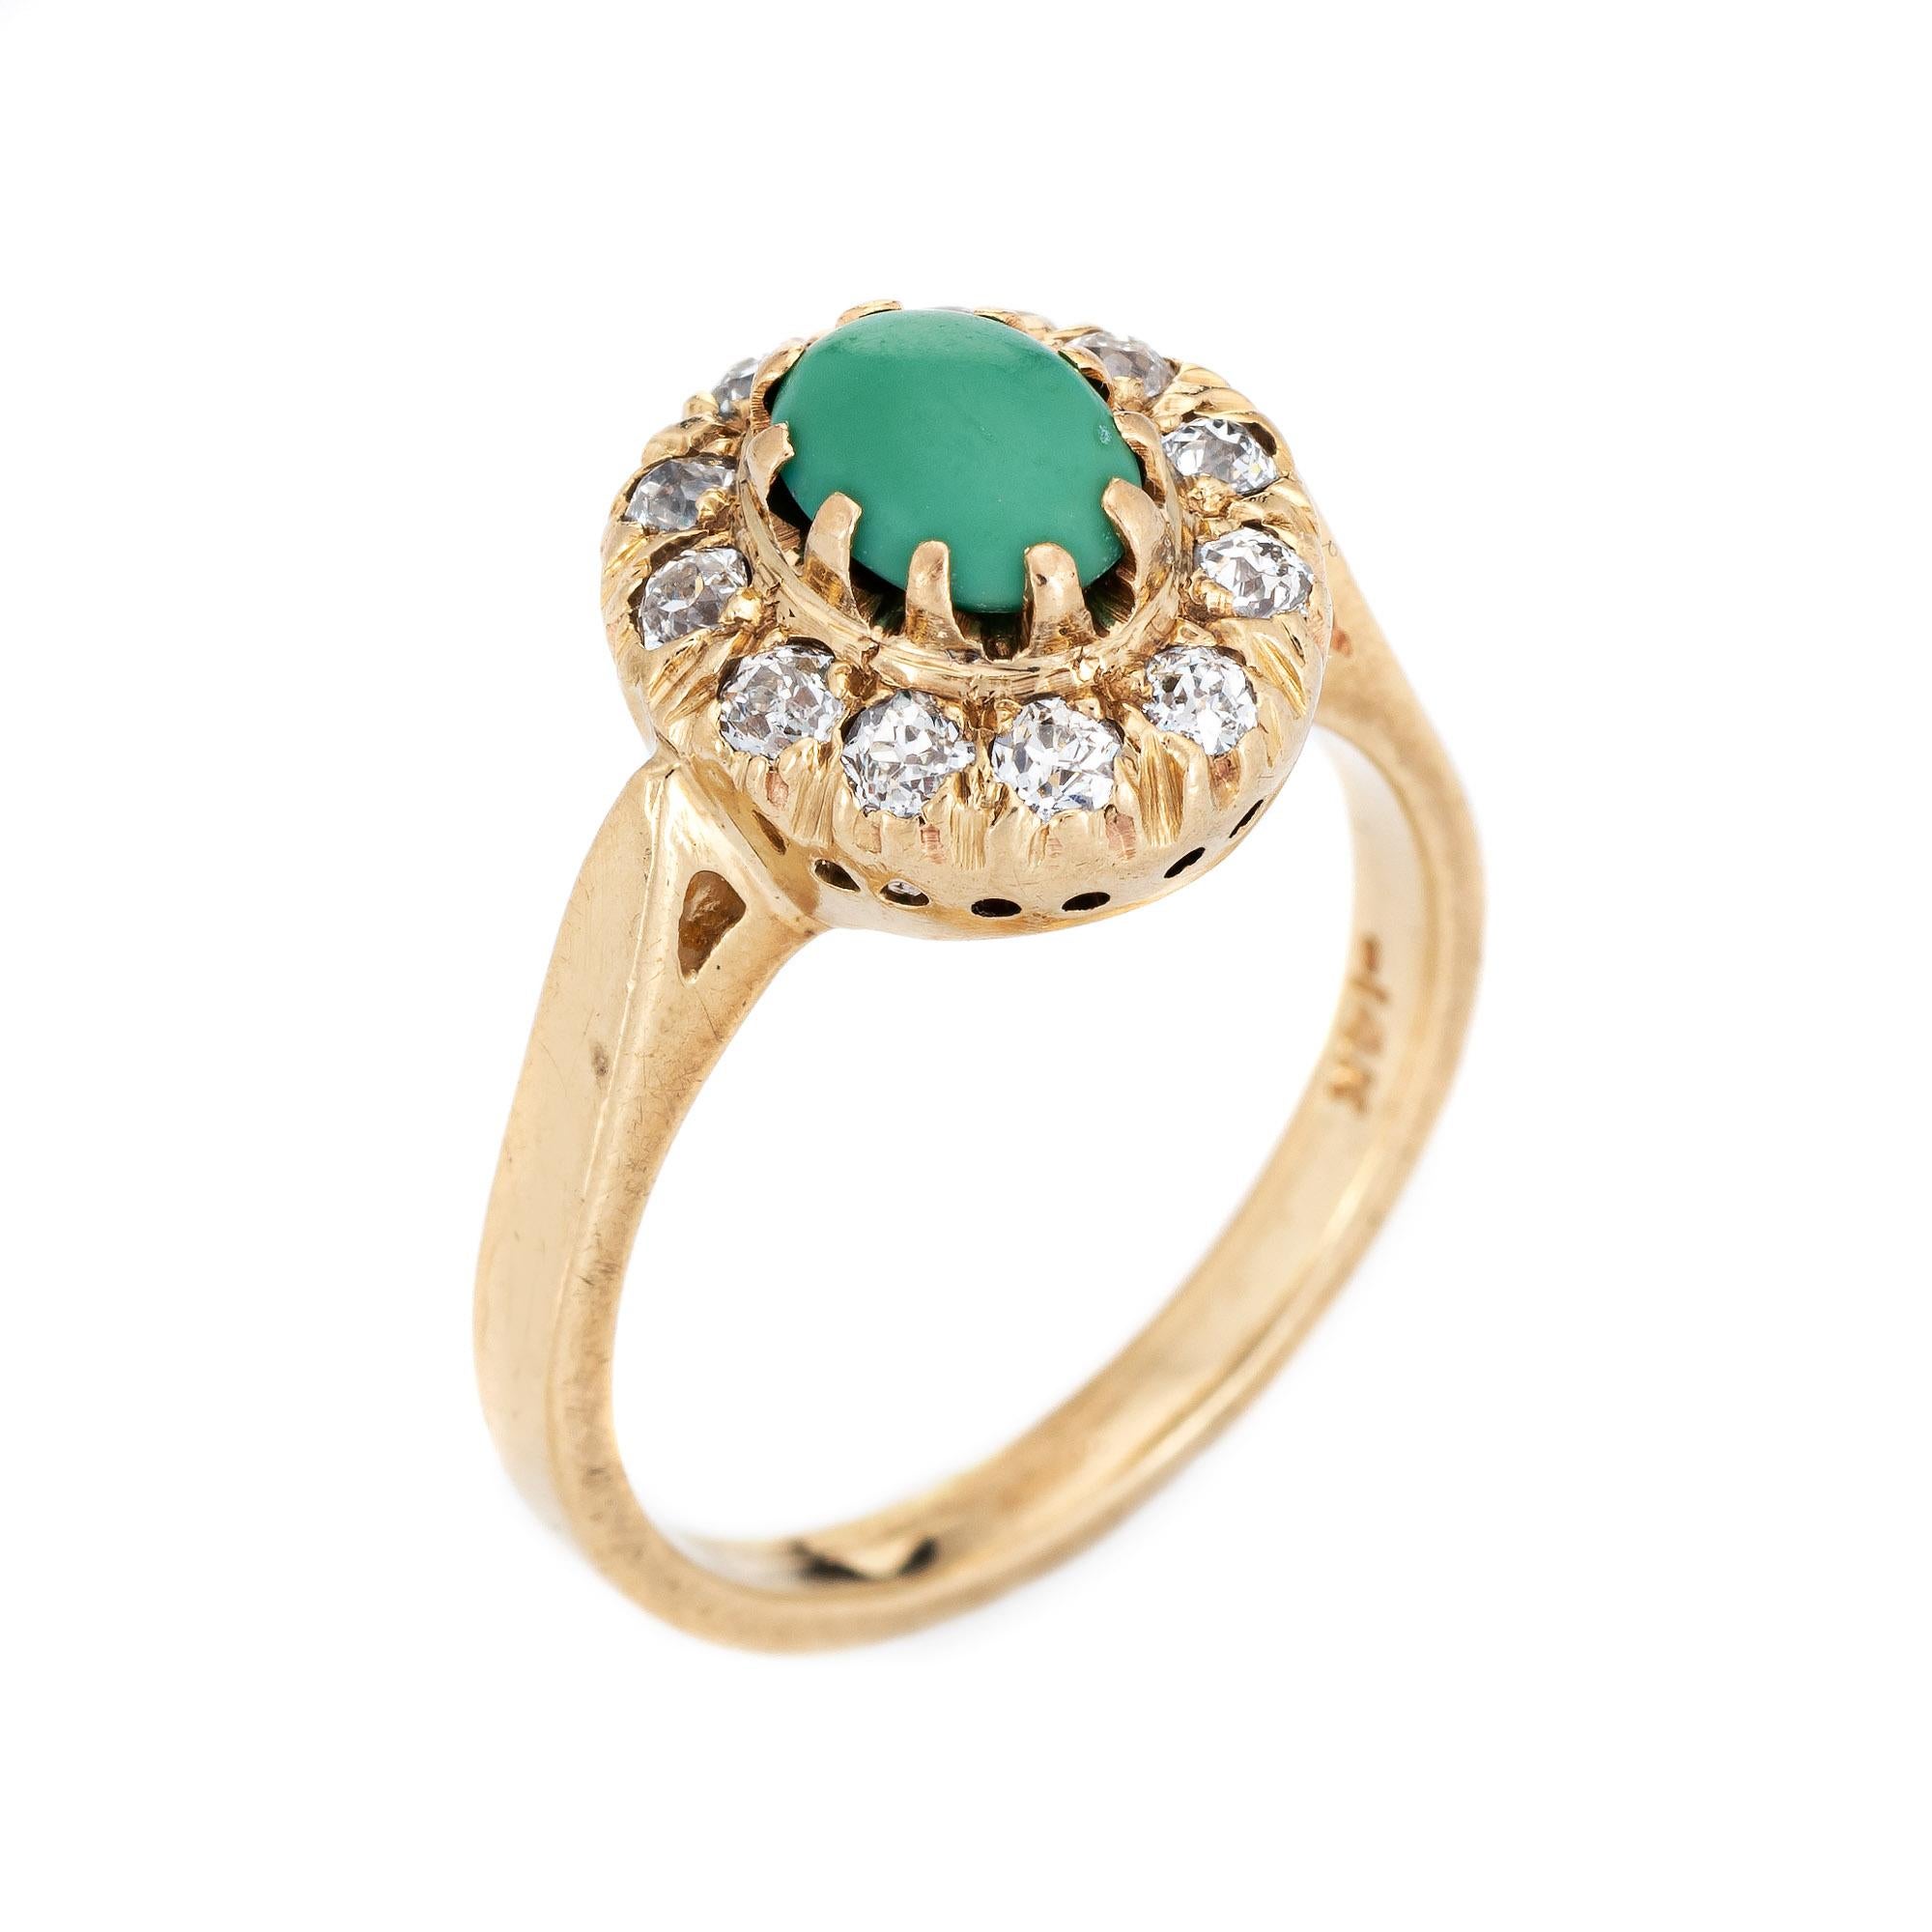 Finely detailed antique Victorian era ring (circa 1880s to 1900s) crafted in 14k yellow gold. 

Turquoise cabochon measures 6mm x 5mm (estimated at 1.10 carat), accented with 11 estimated 0.07 carat old mine cut diamonds. The total diamond weight is